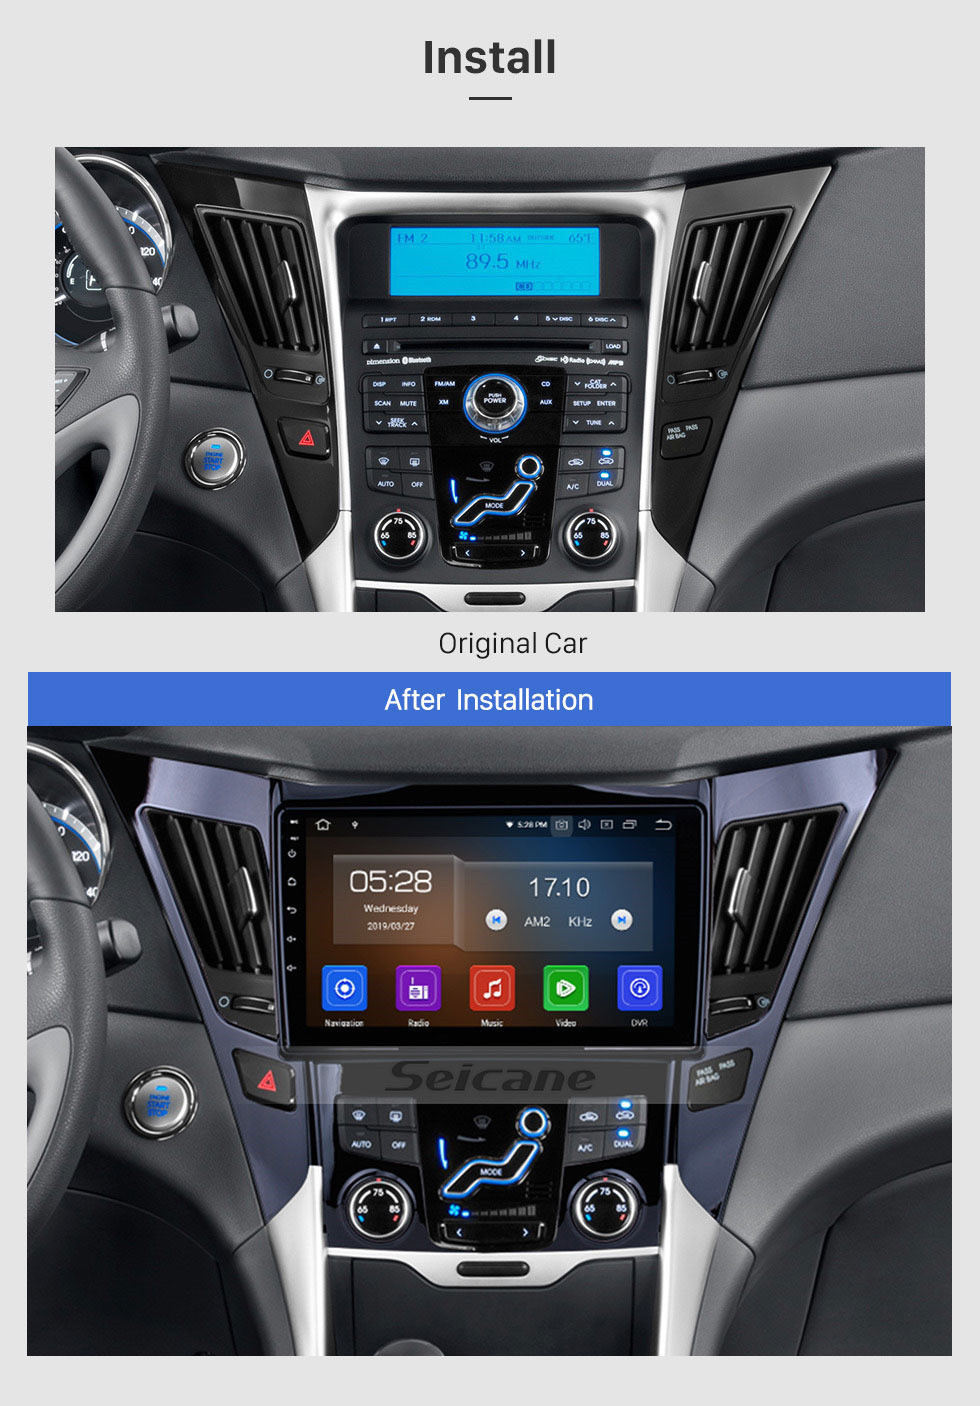 Seicane 9 inch Android 11.0 Radio GPS navigation system for 2011-2015 Hyundai SONATA with Bluetooth HD 1024*600 touch screen Mirror link OBD2 DVR Rearview camera TV 1080P Video 3G WIFI Steering Wheel Control USB